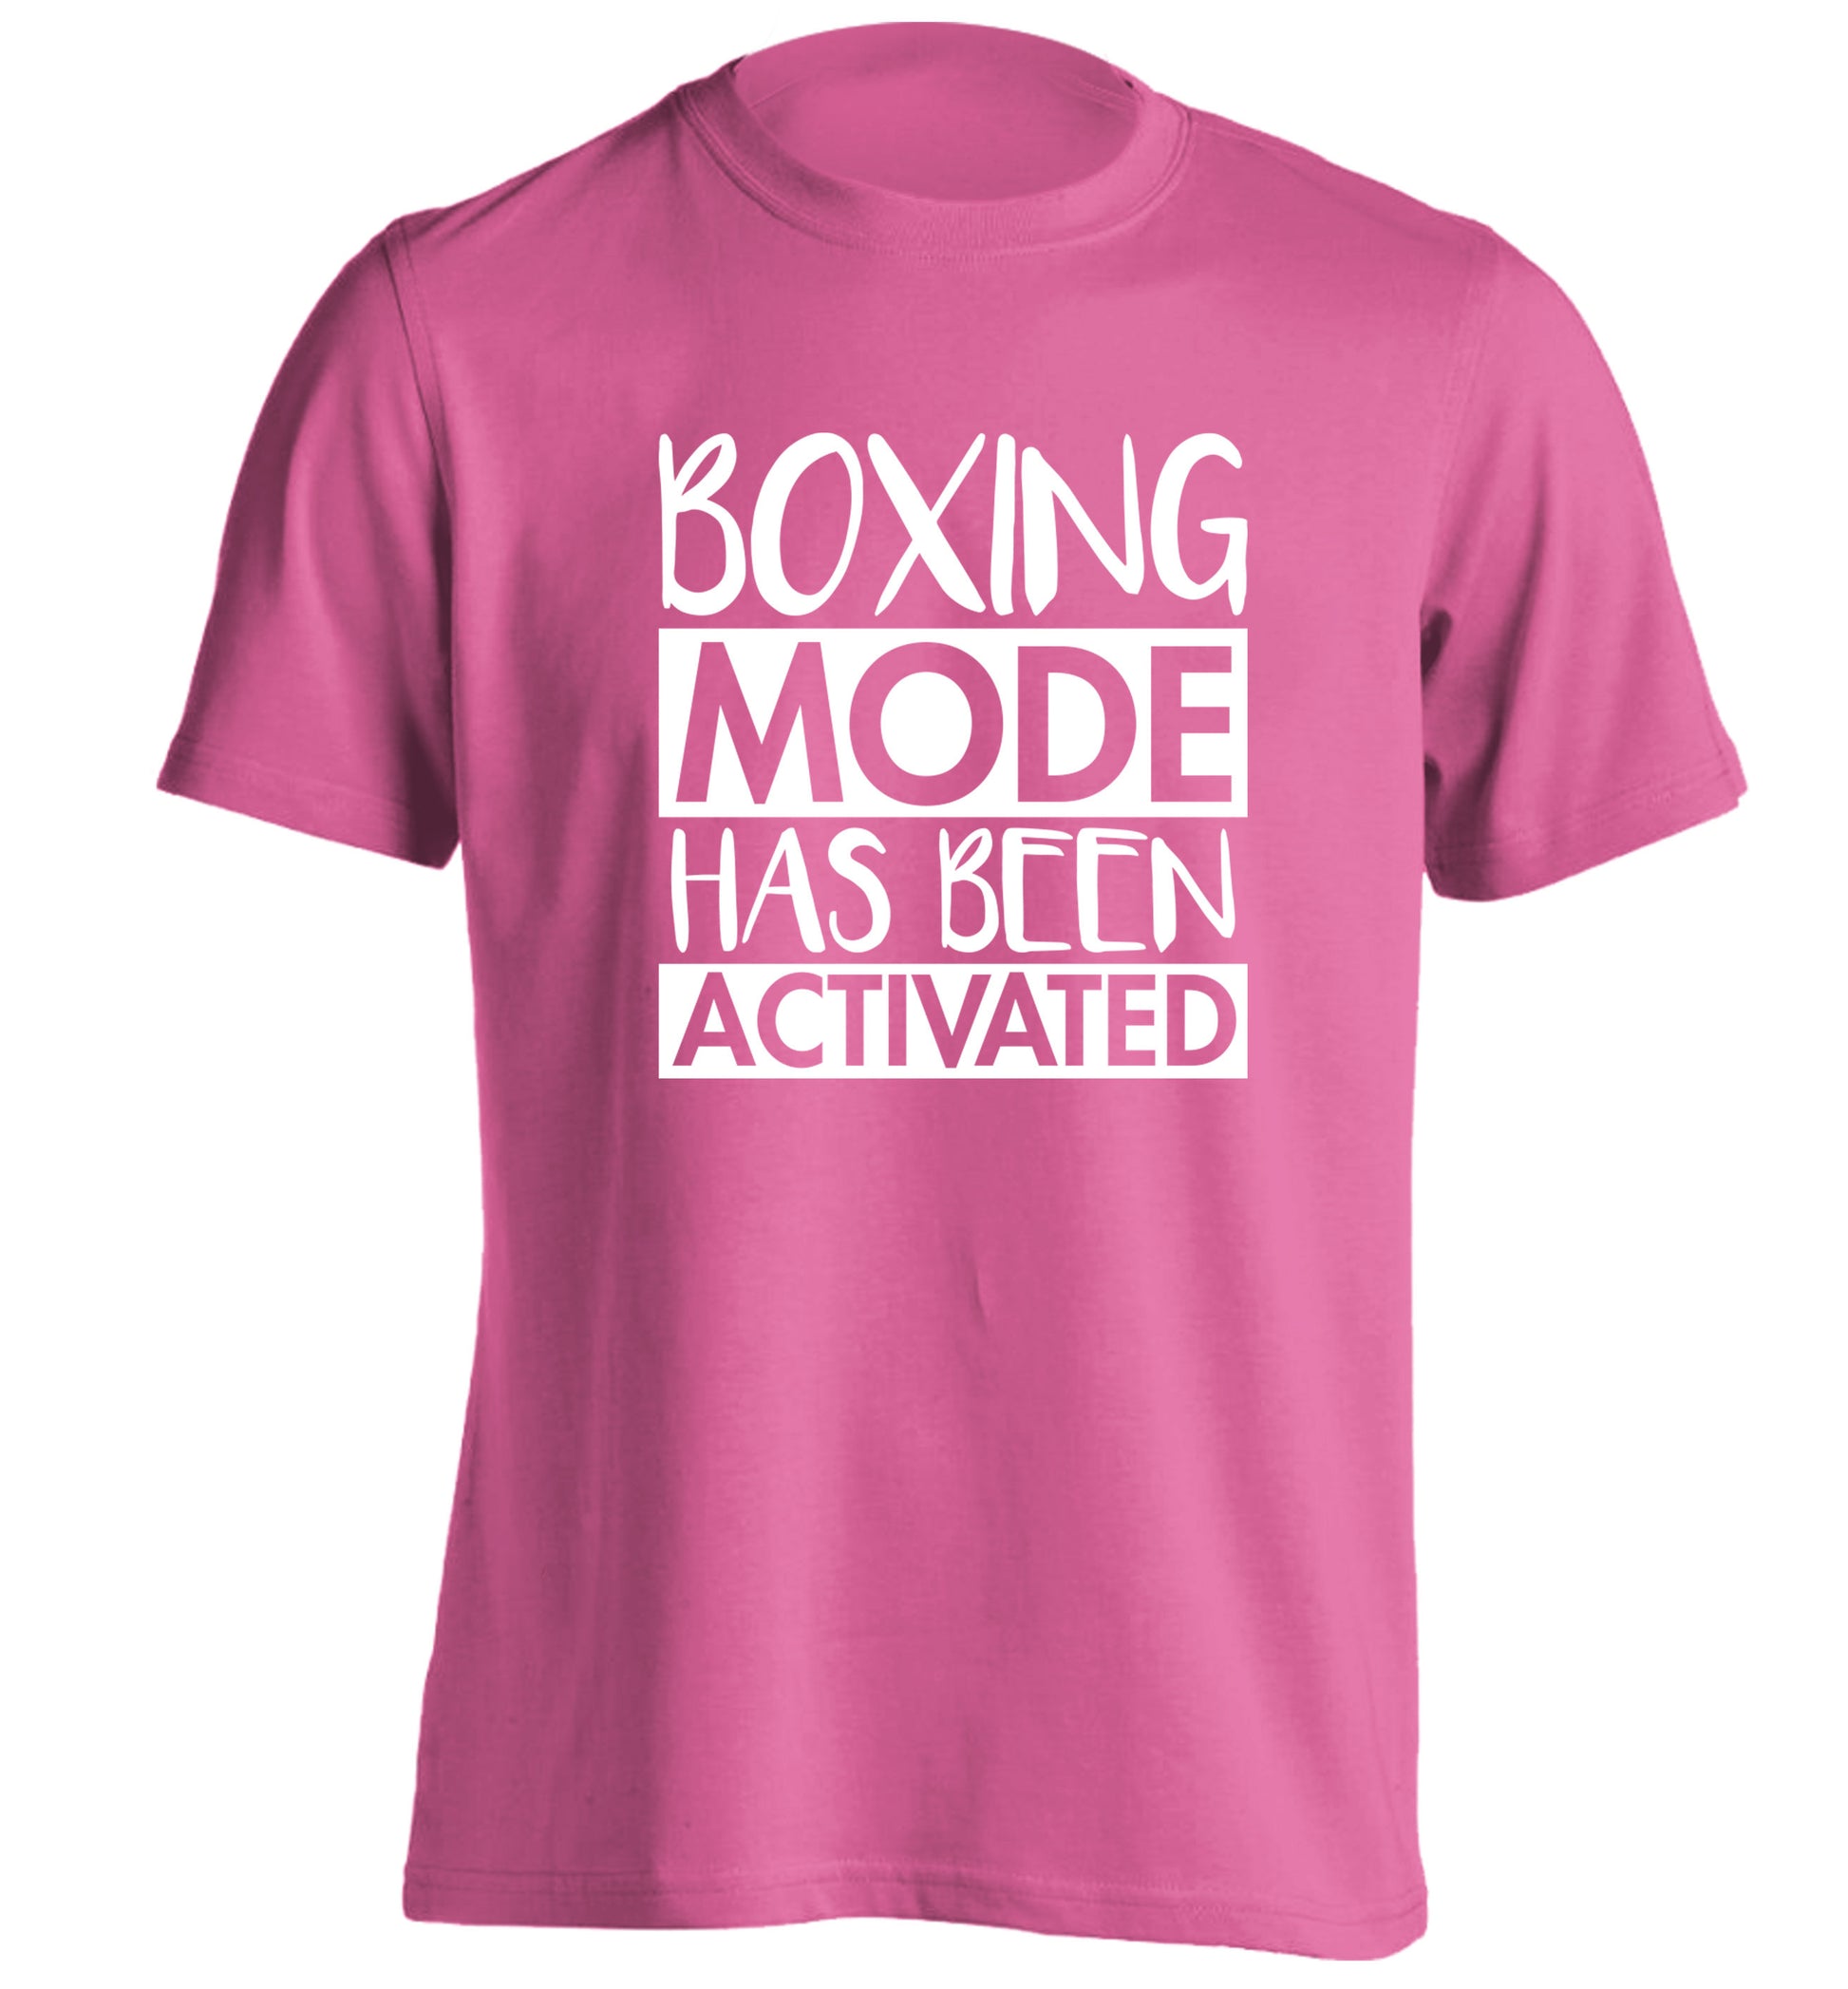 Boxing mode activated adults unisex pink Tshirt 2XL